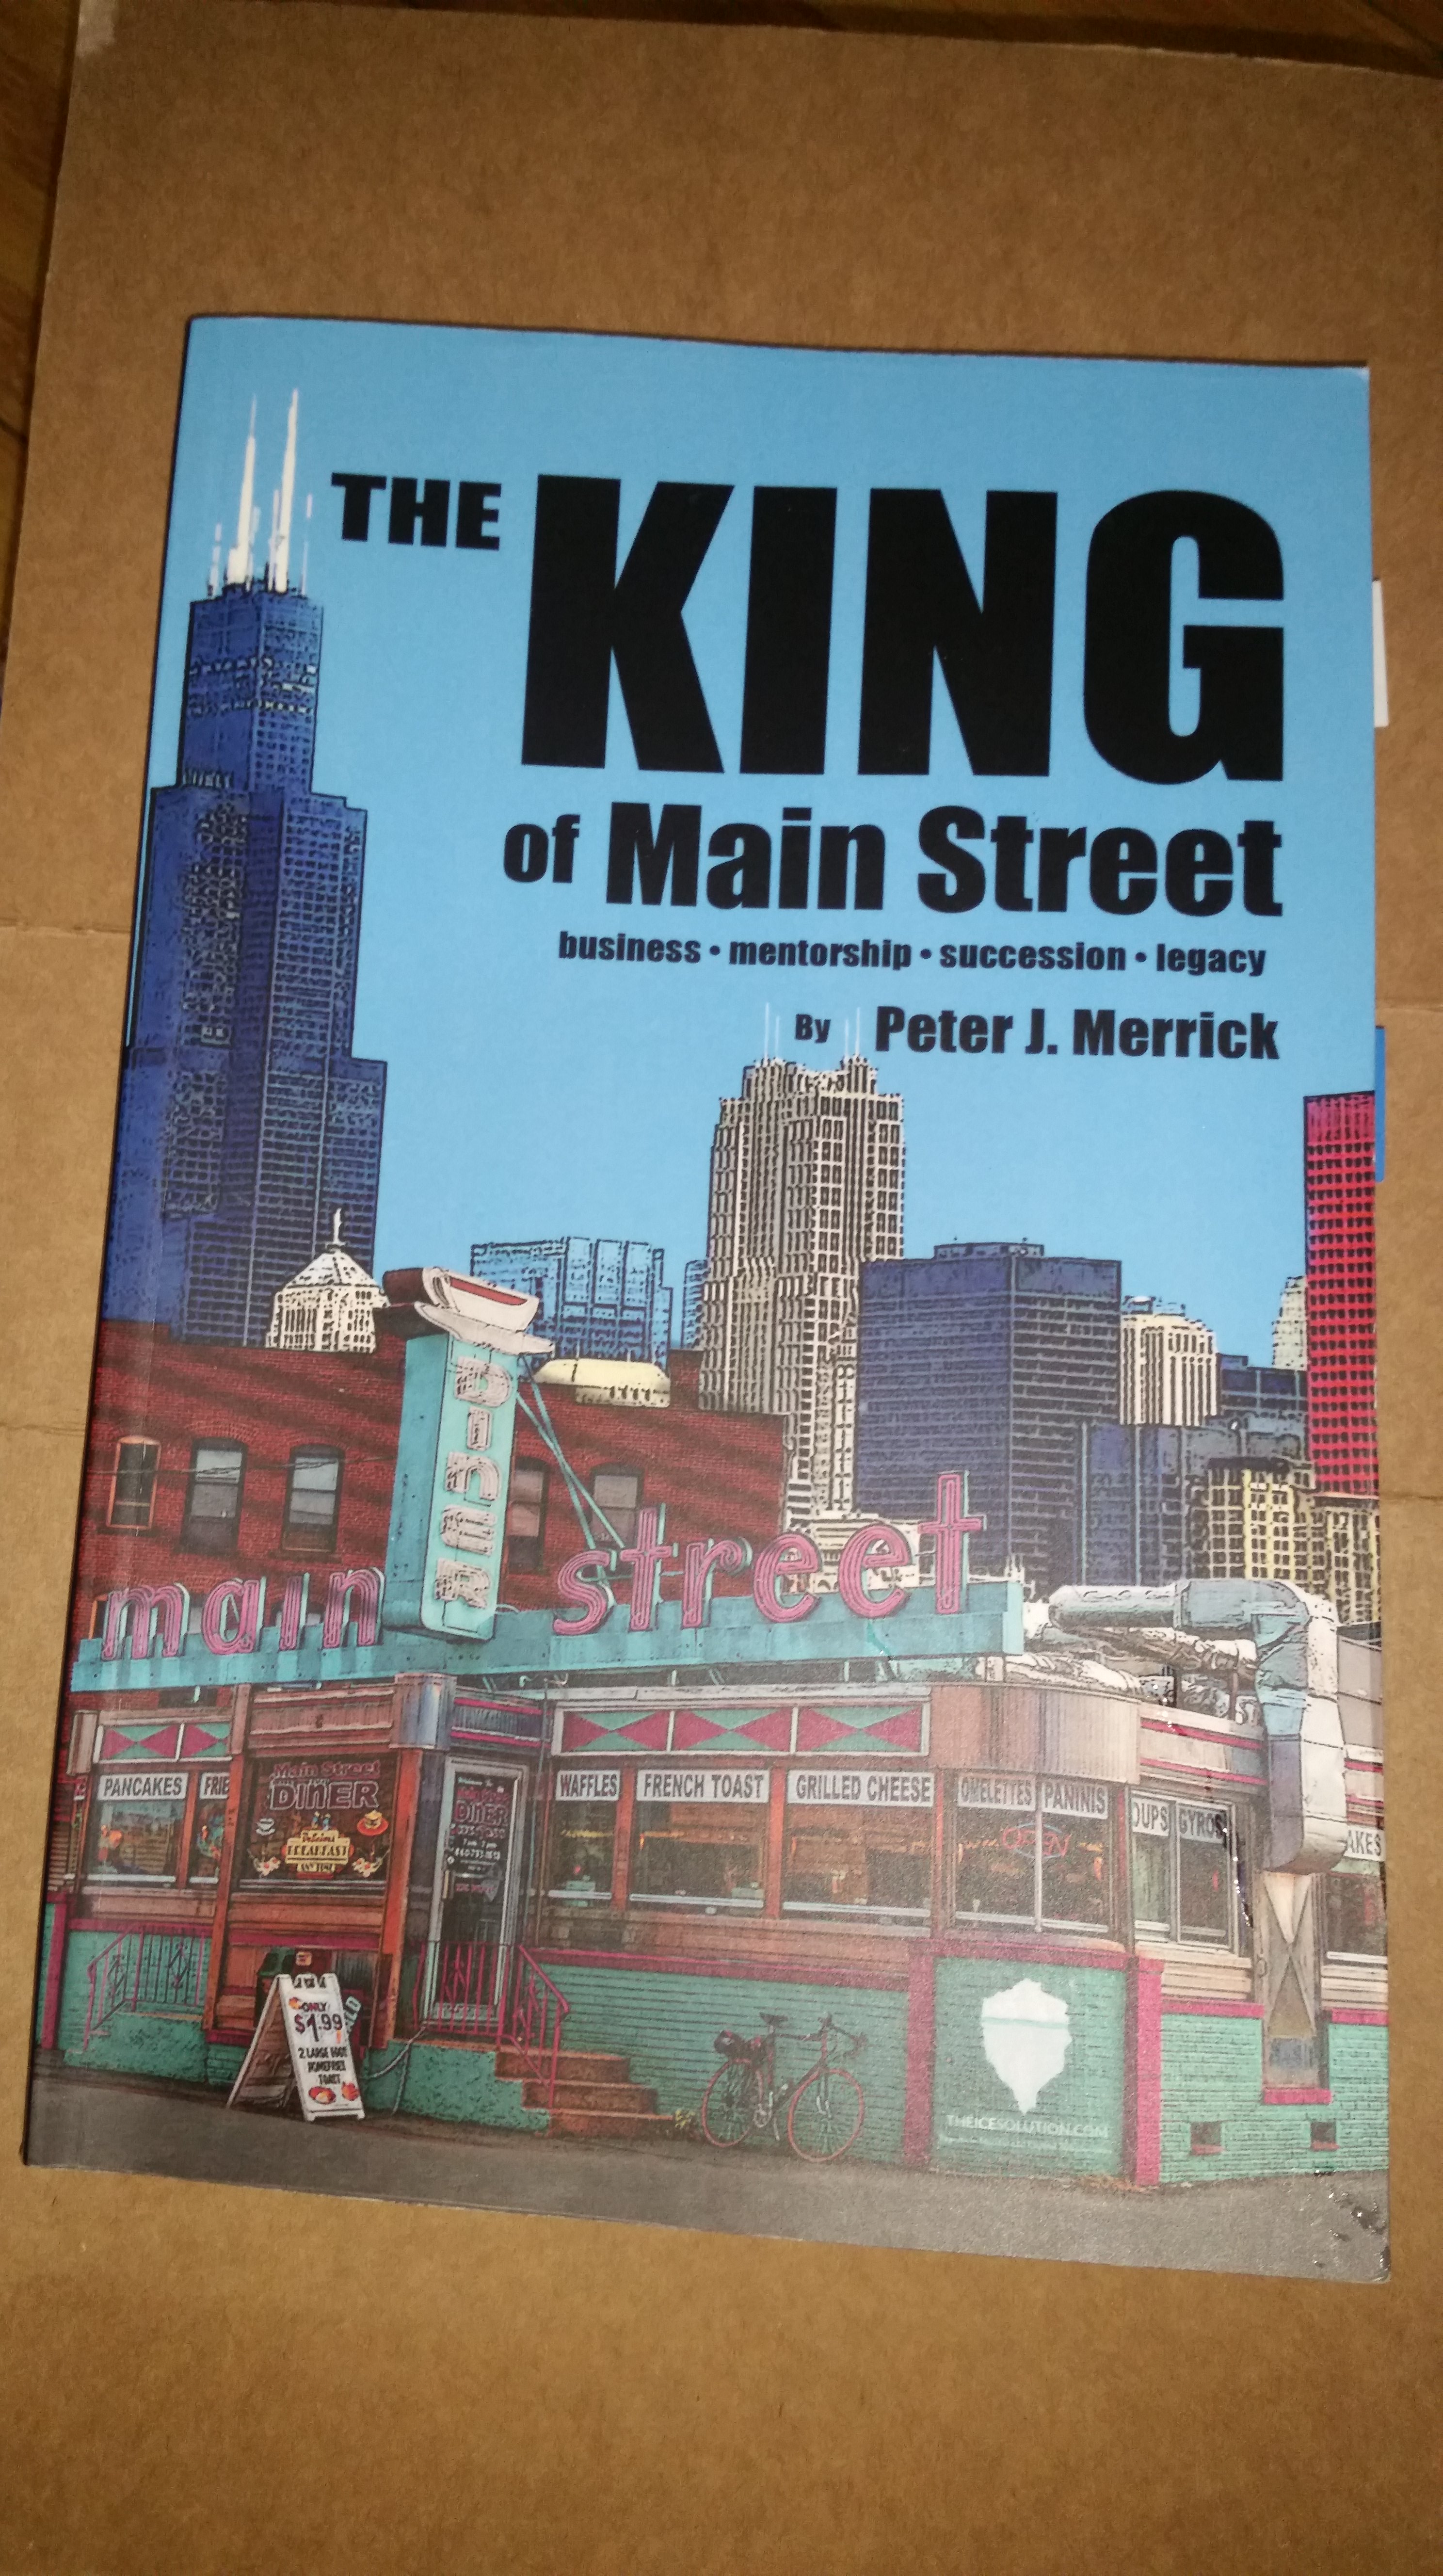 Review: The King of Main Street - Read and Write Here